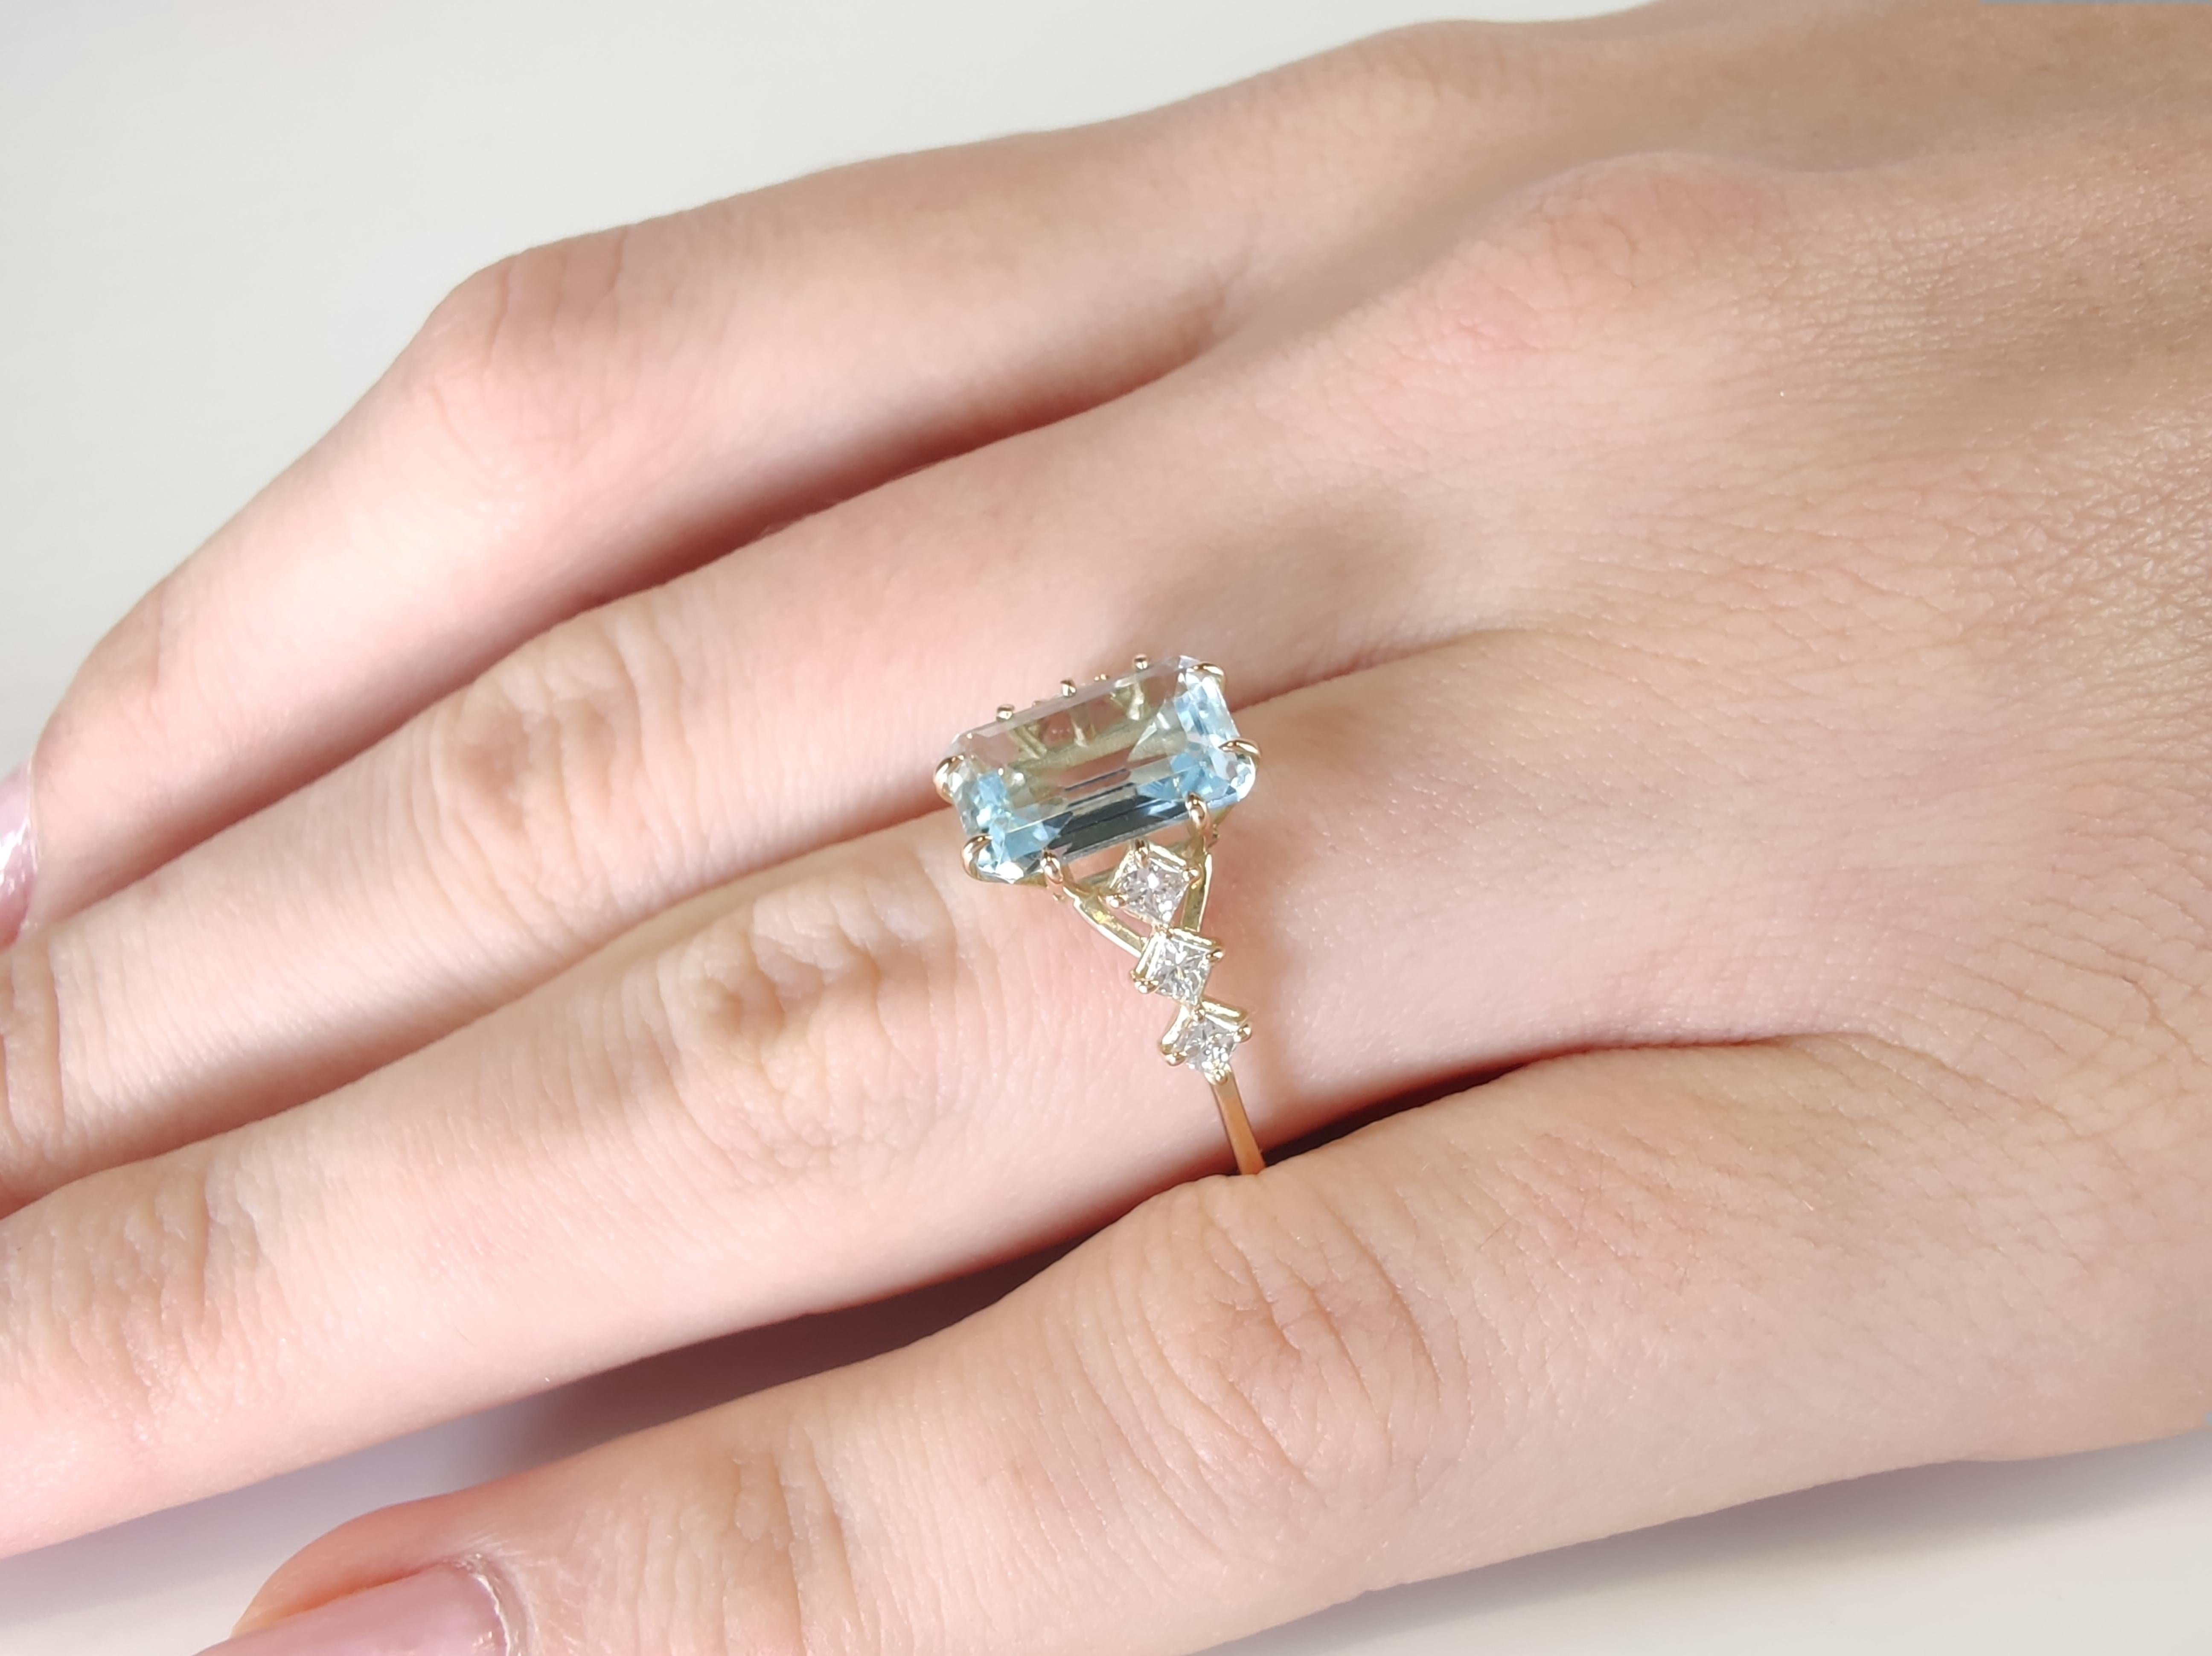 Discover timeless elegance with our meticulously handcrafted women's ring—a unique masterpiece perfect for weddings, engagements, proposals, or special gifts. This handmade ring features a stunning central aquamarine, expertly claw-set and framed by